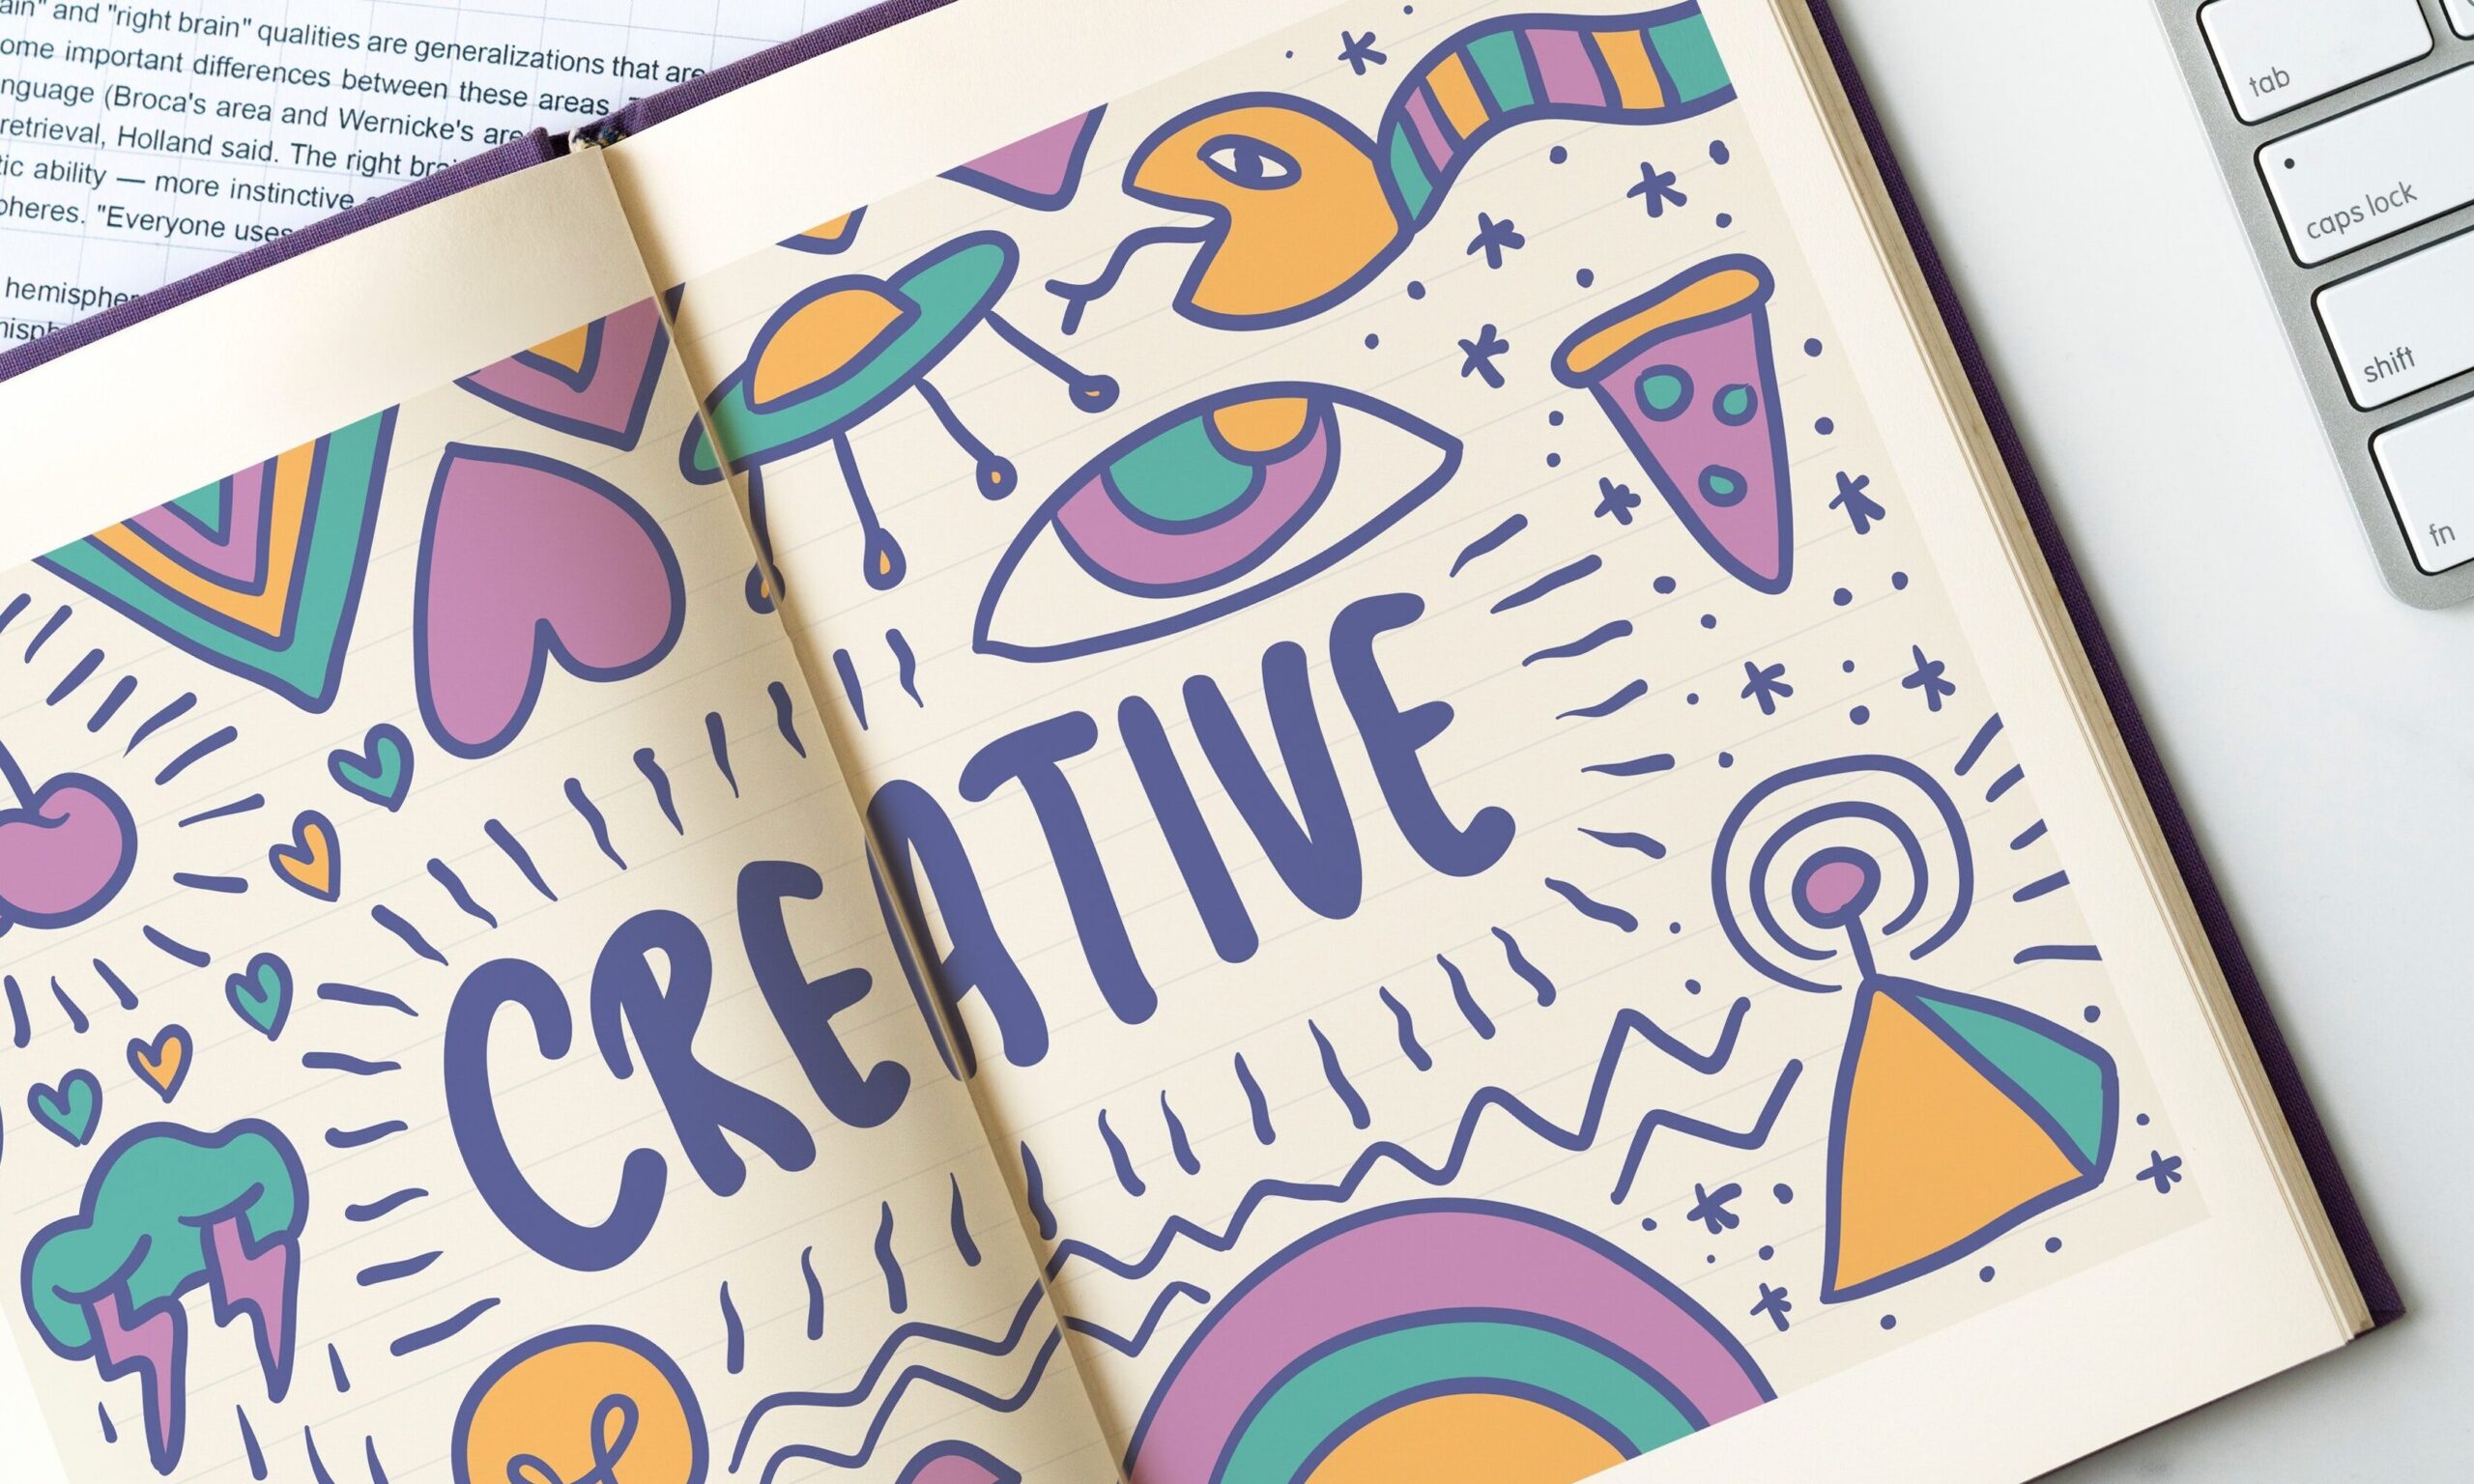 An open book with the word Creative in the center in bright colors